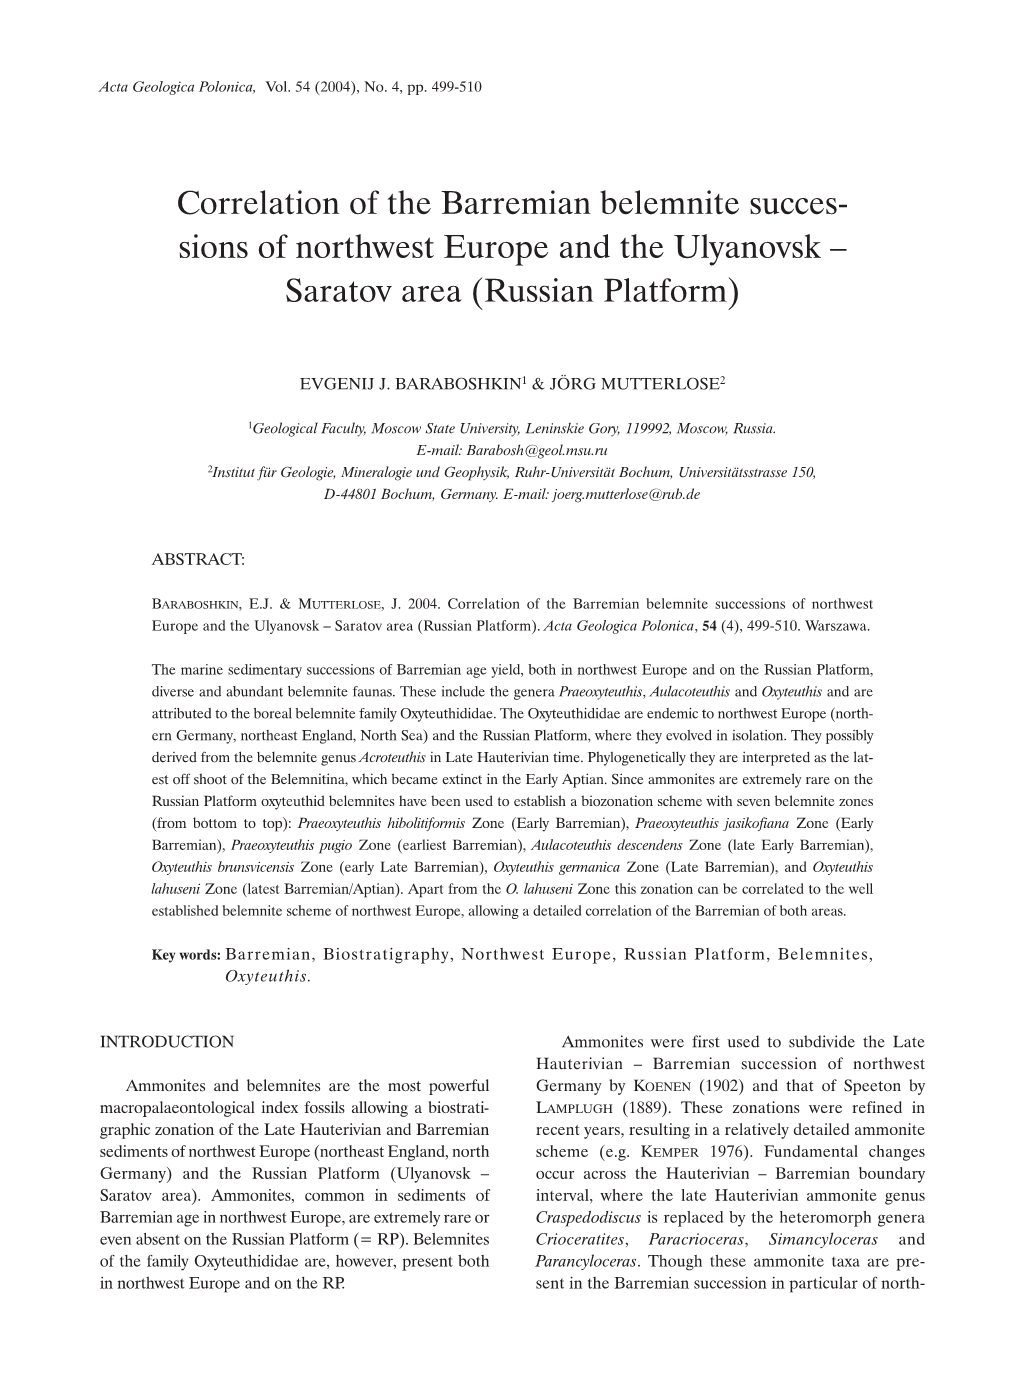 Correlation of the Barremian Belemnite Succes- Sions of Northwest Europe and the Ulyanovsk – Saratov Area (Russian Platform)